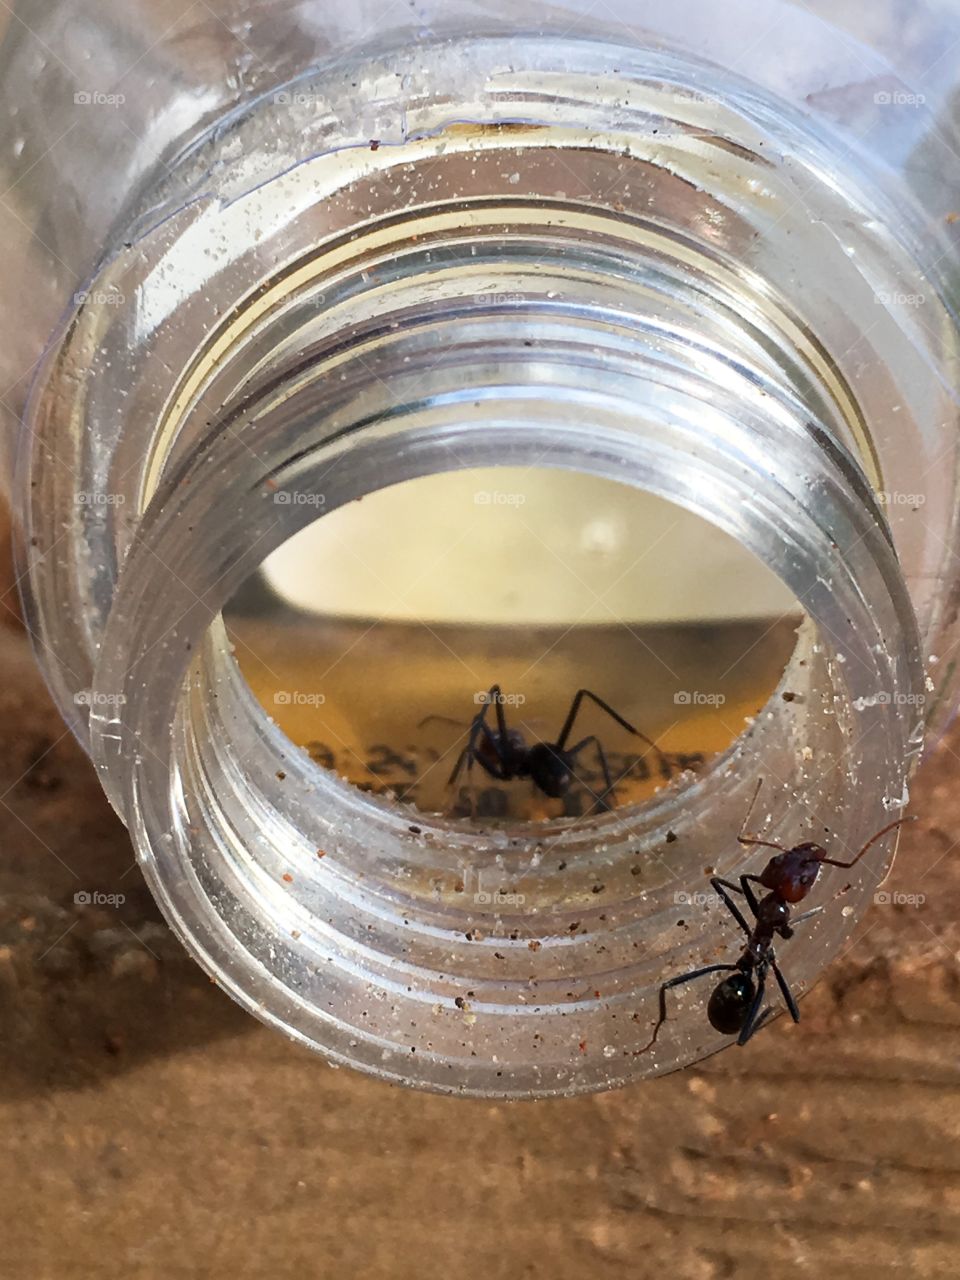 Worker ants large inside and outside glass jar laying on its side